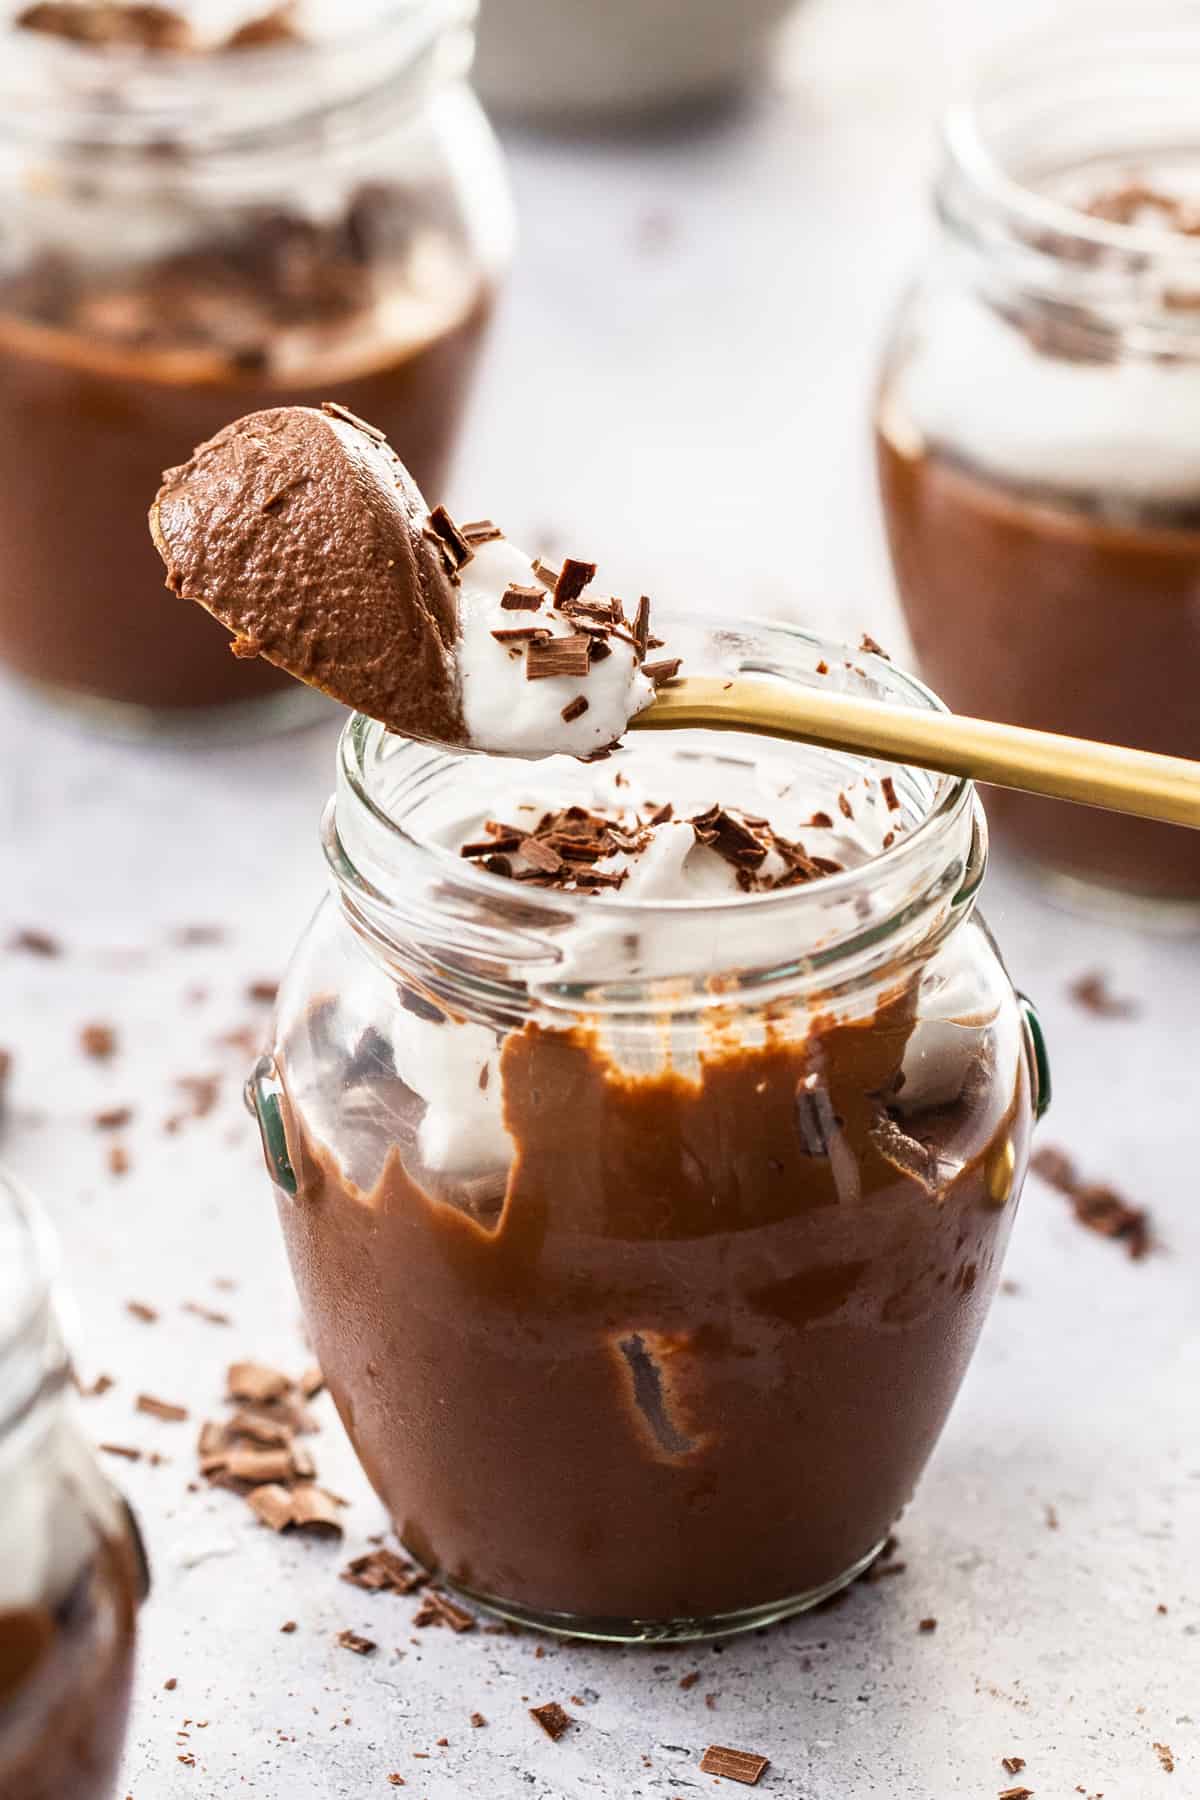 Jar of chocolate mousse, with a spoon resting on top with mousse on it.